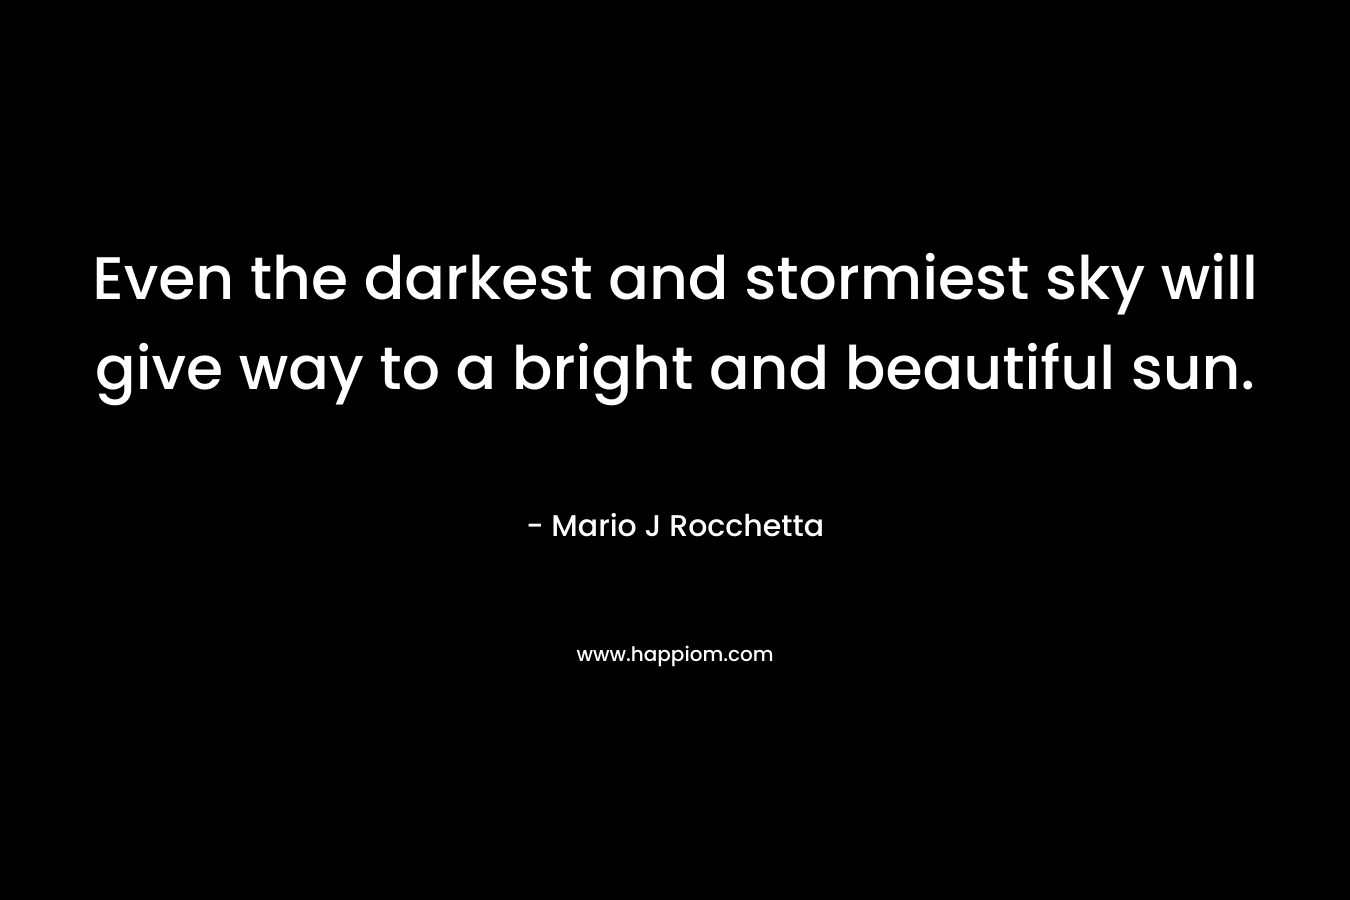 Even the darkest and stormiest sky will give way to a bright and beautiful sun.